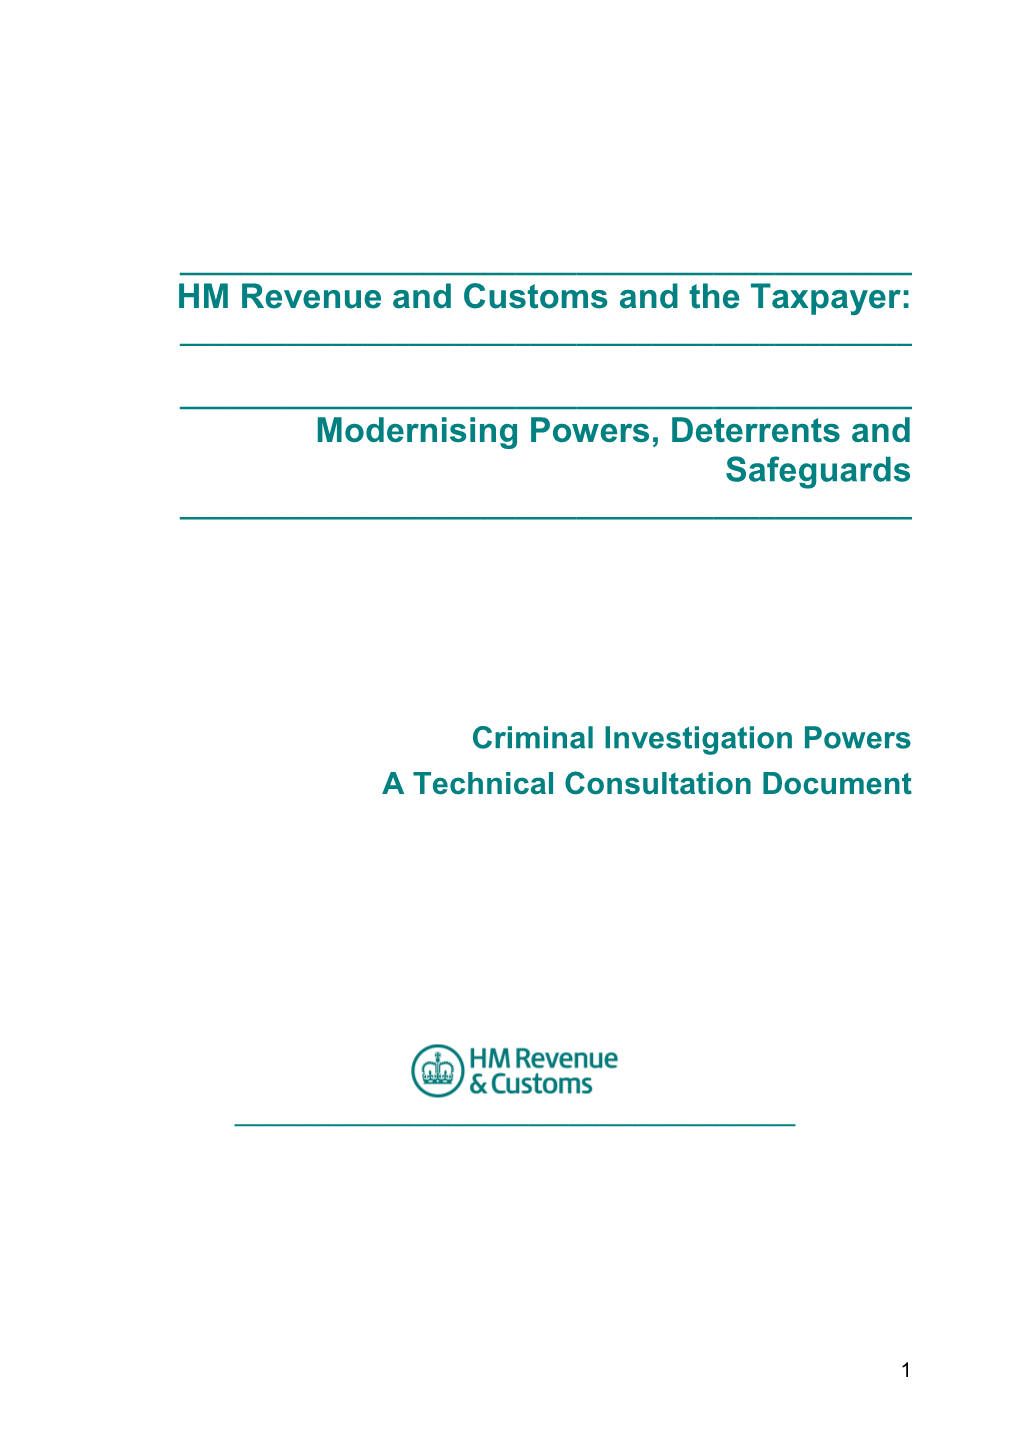 HM Revenue and Customs and the Taxpayer: Modernising Powers